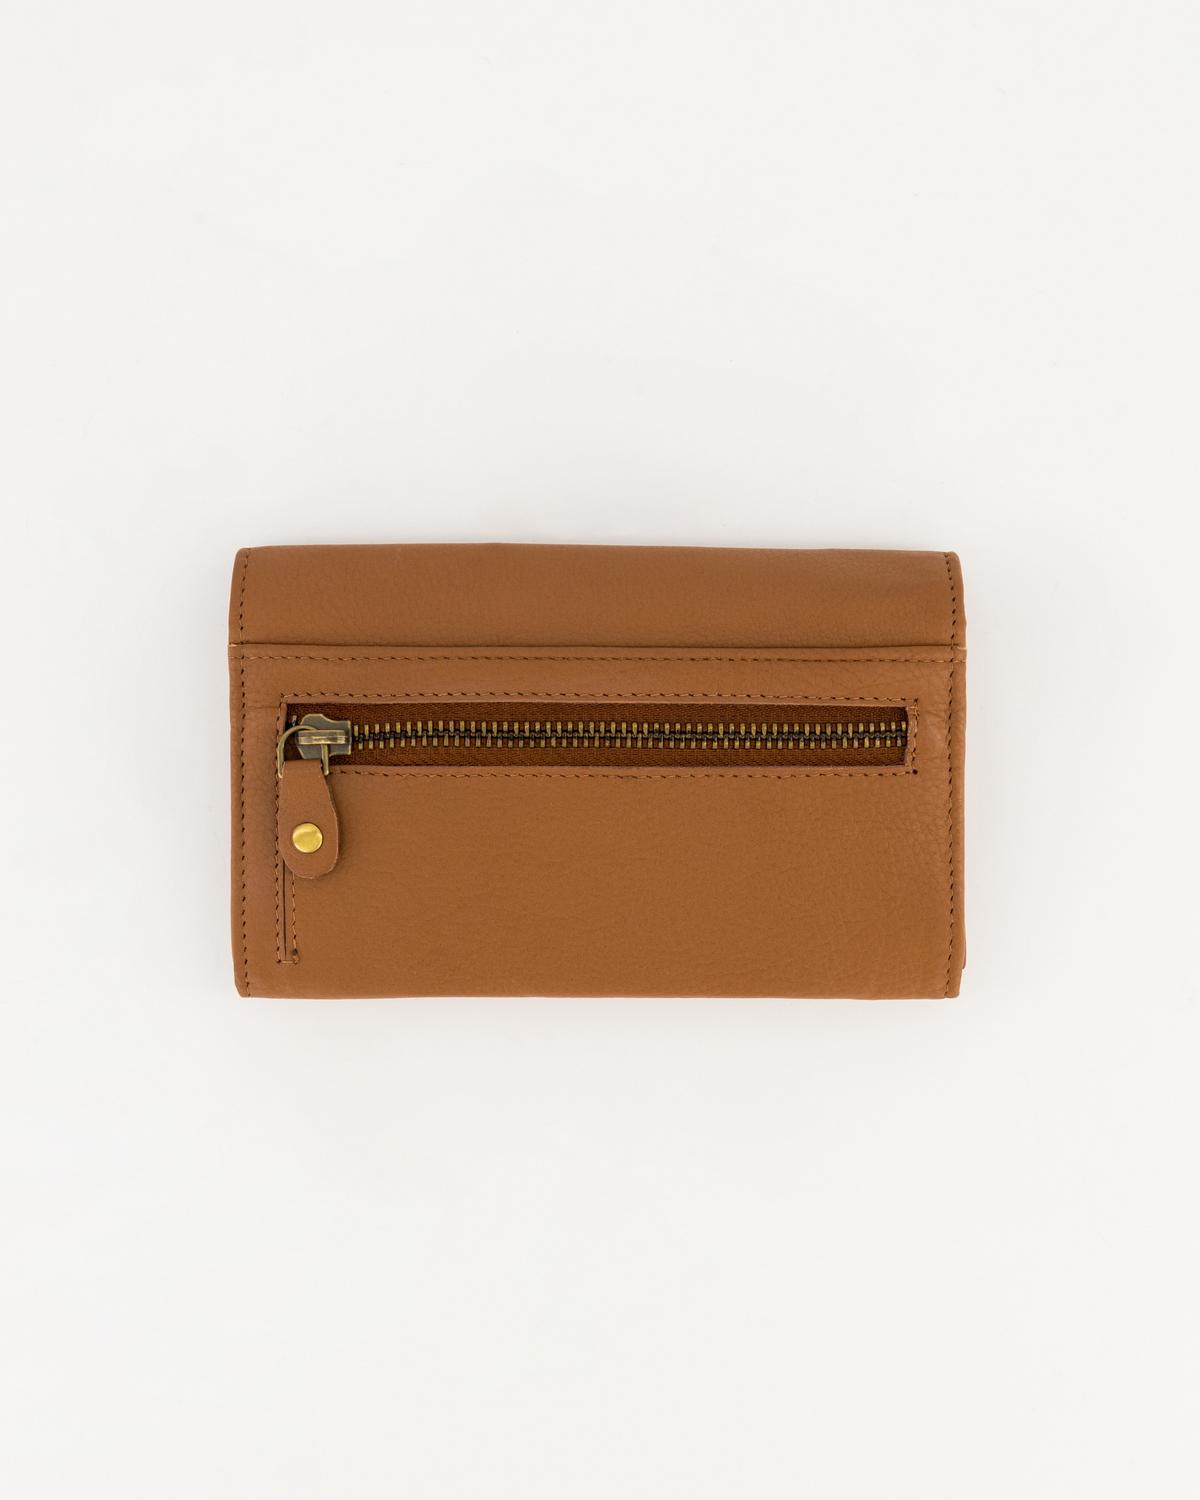 Zintle Fold-Over Leather Wallet -  Tan